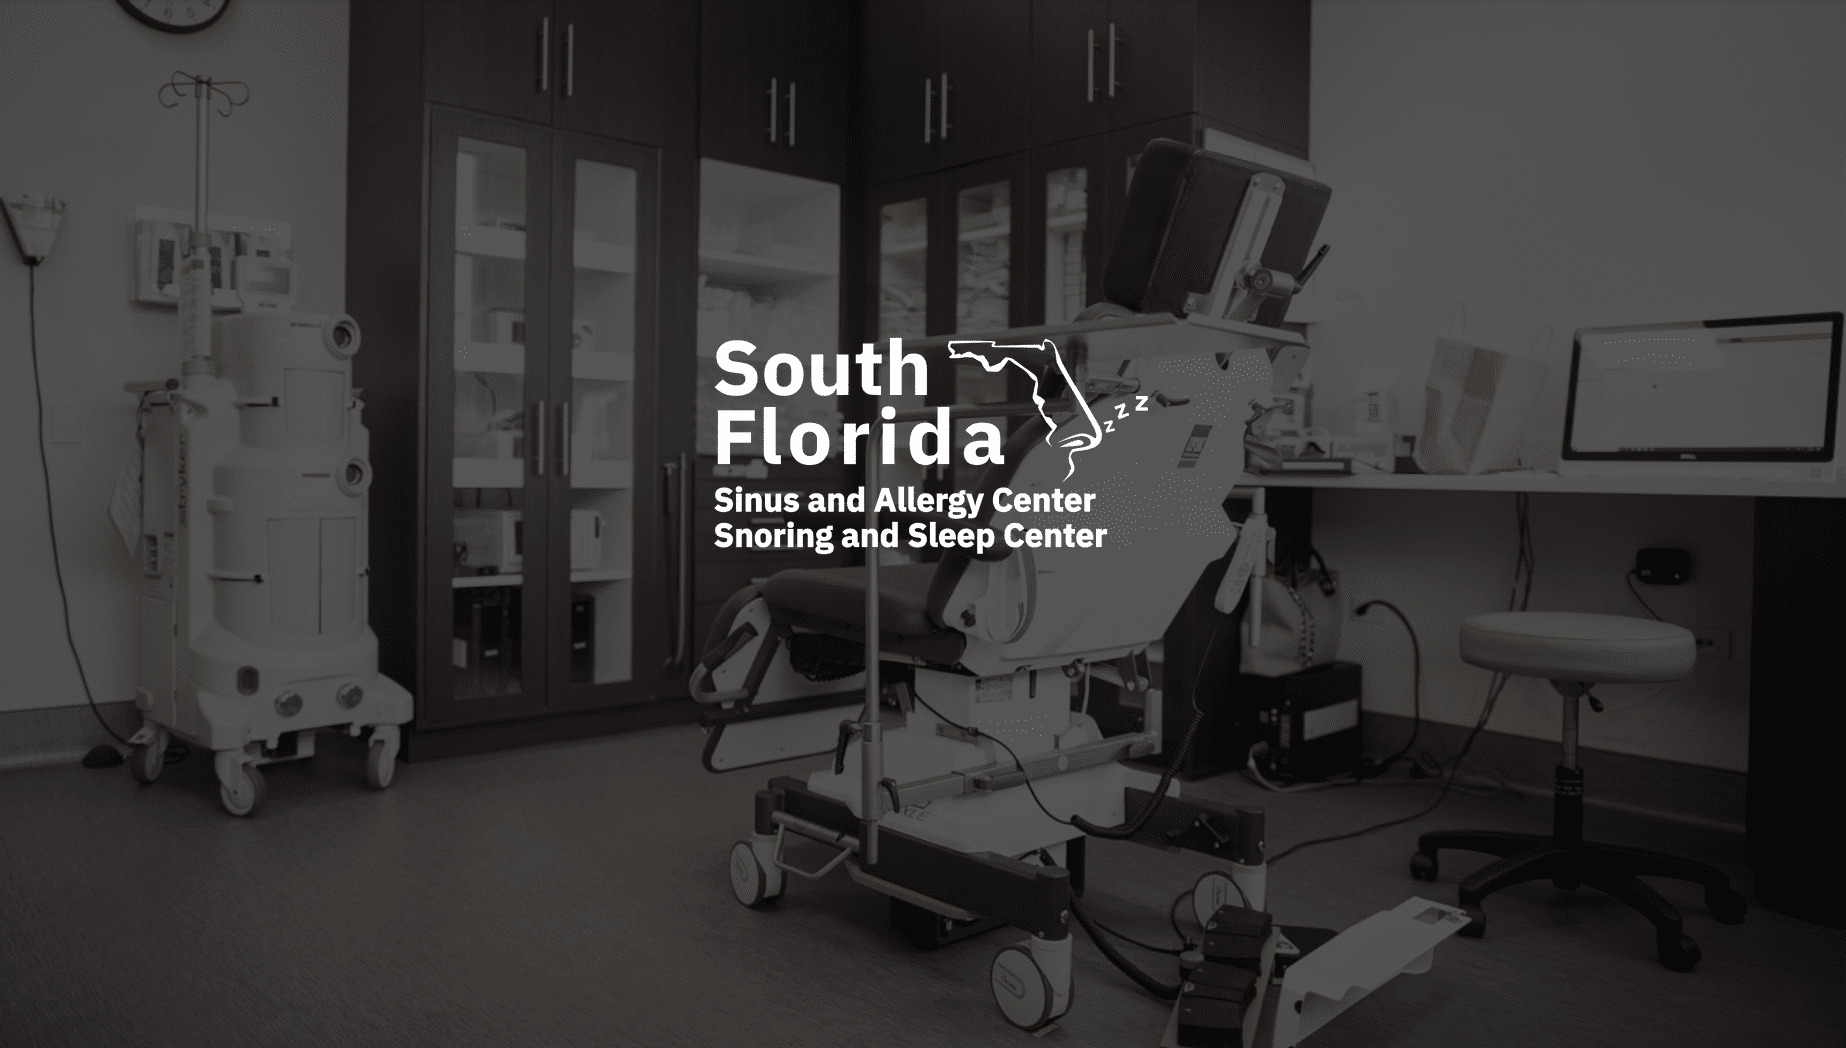 IU C&I Studios Page SFSAC White South Florida Sinus and Allergy Center Snoring and Sleep Center logo against a backdrop showing equipment in a doctor's office